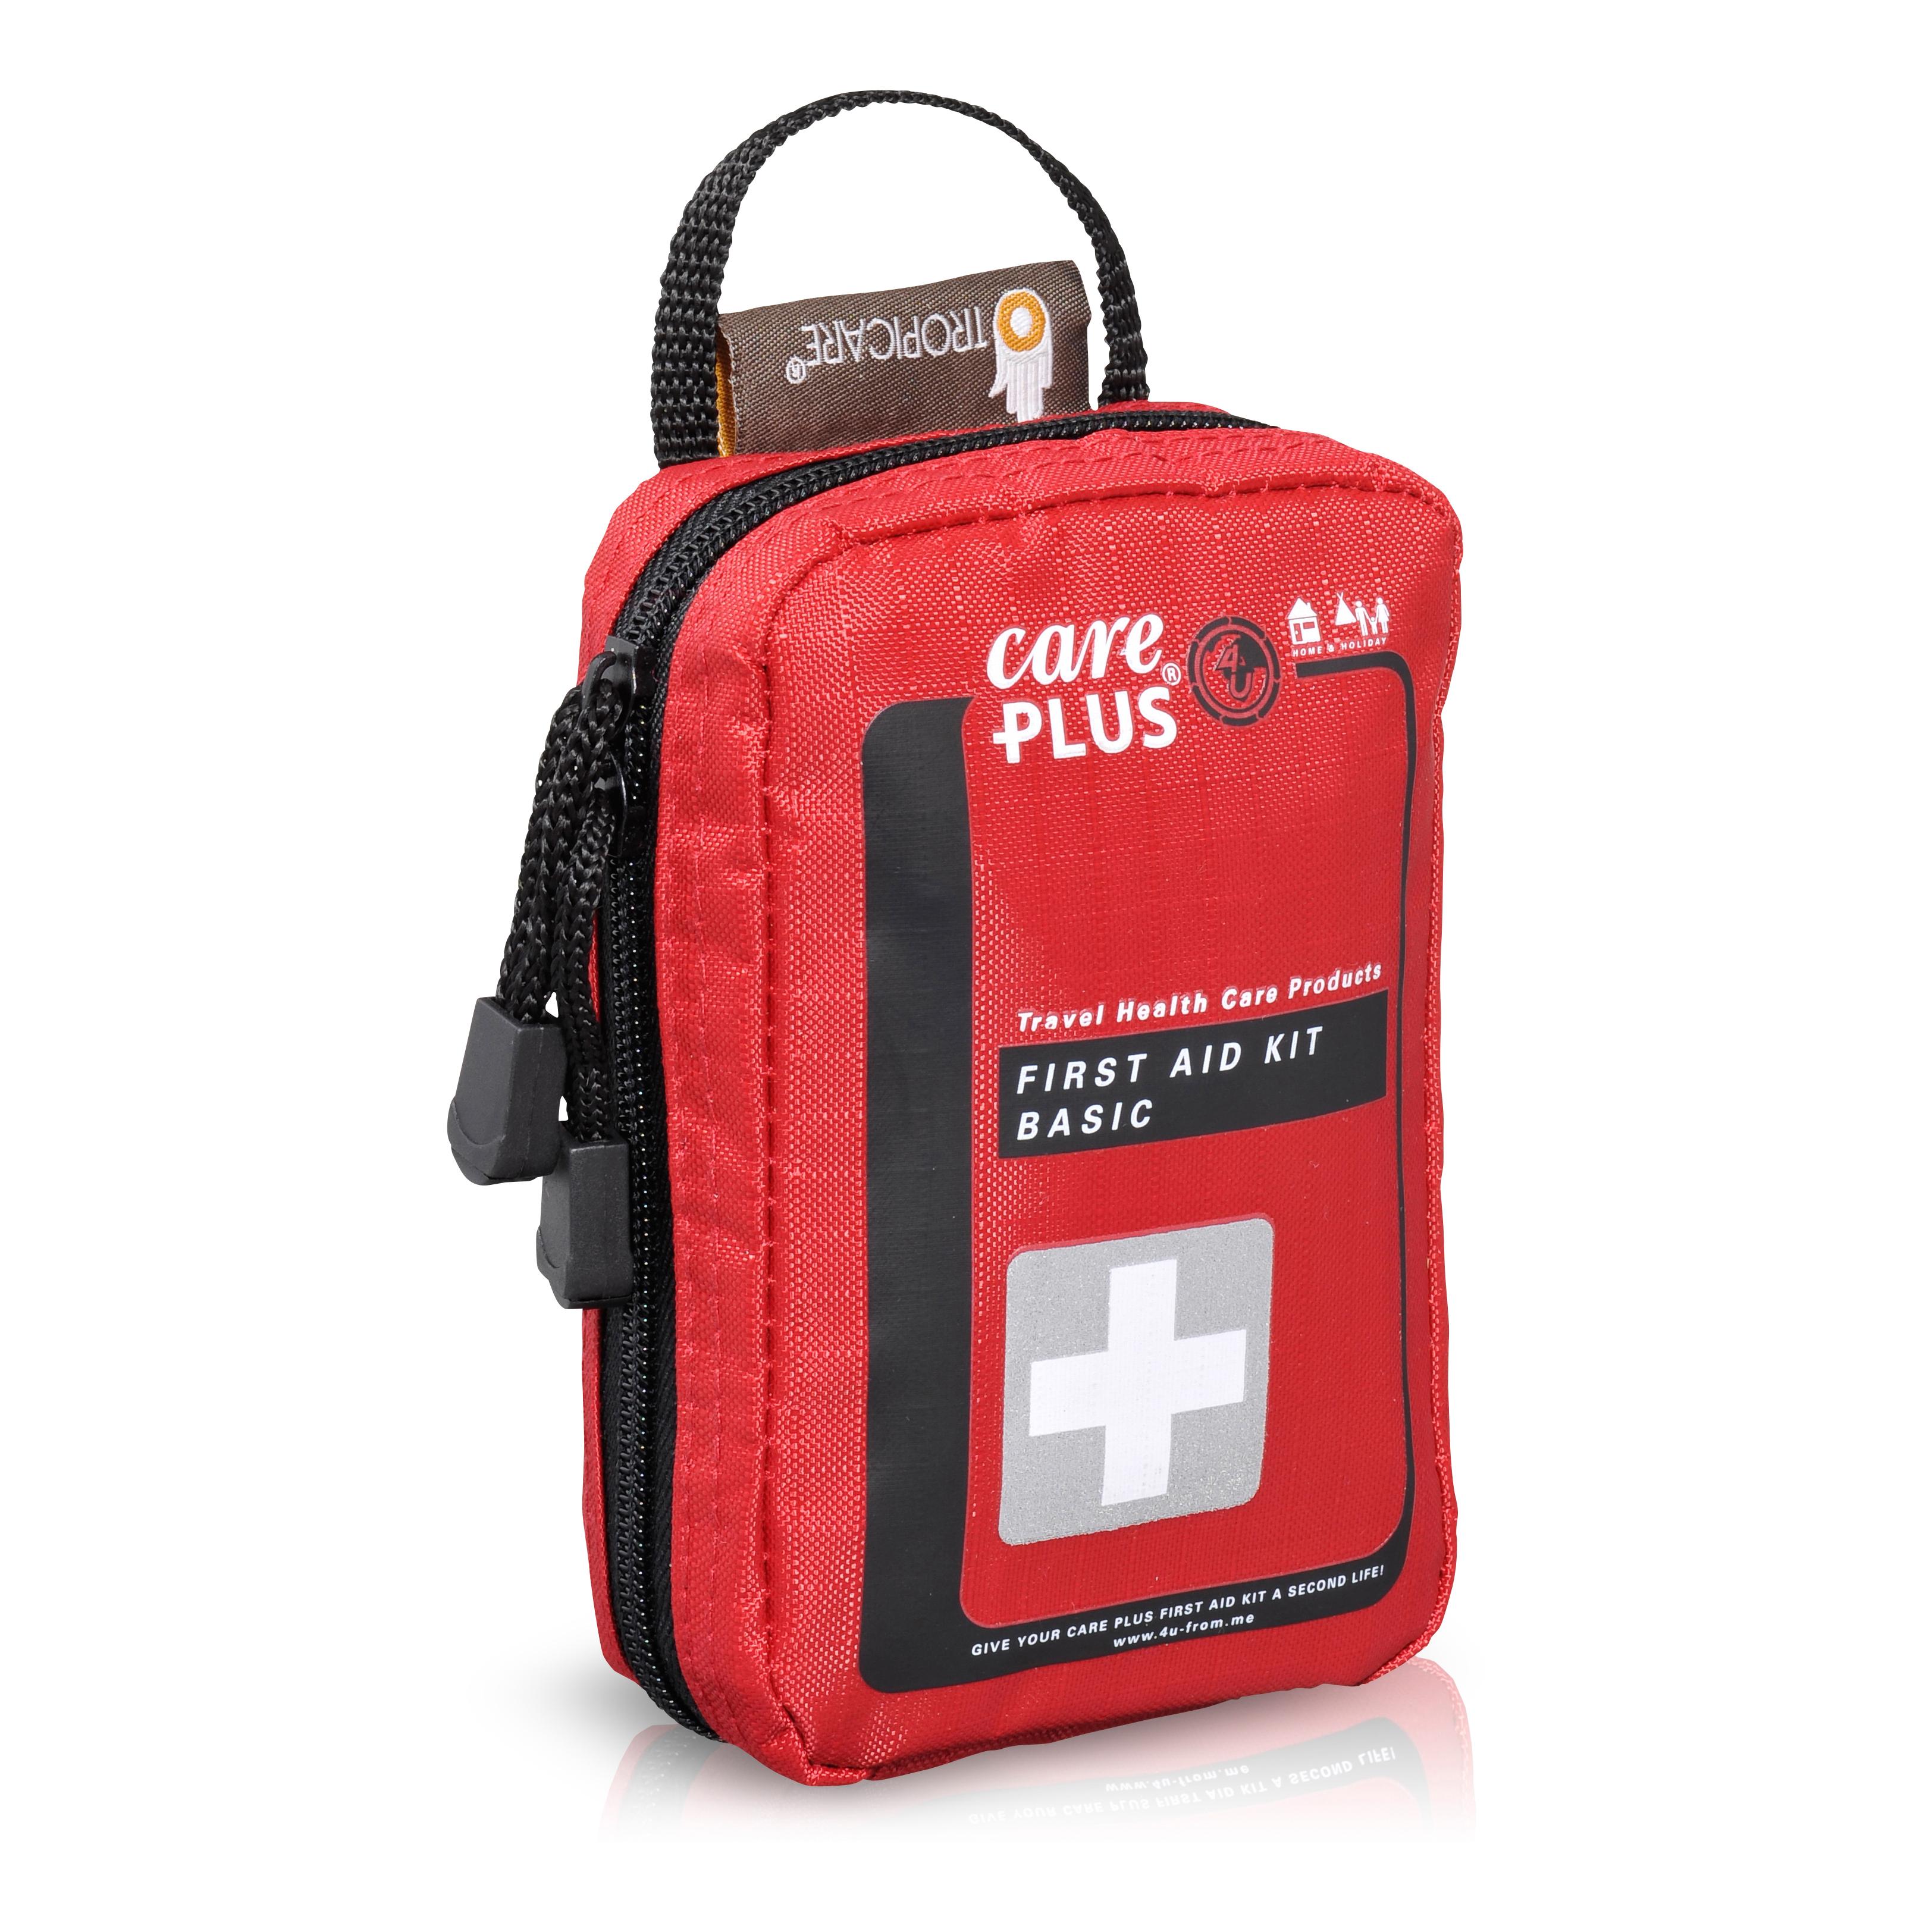 Care Plus First Aid Kit - Basic Rouge 